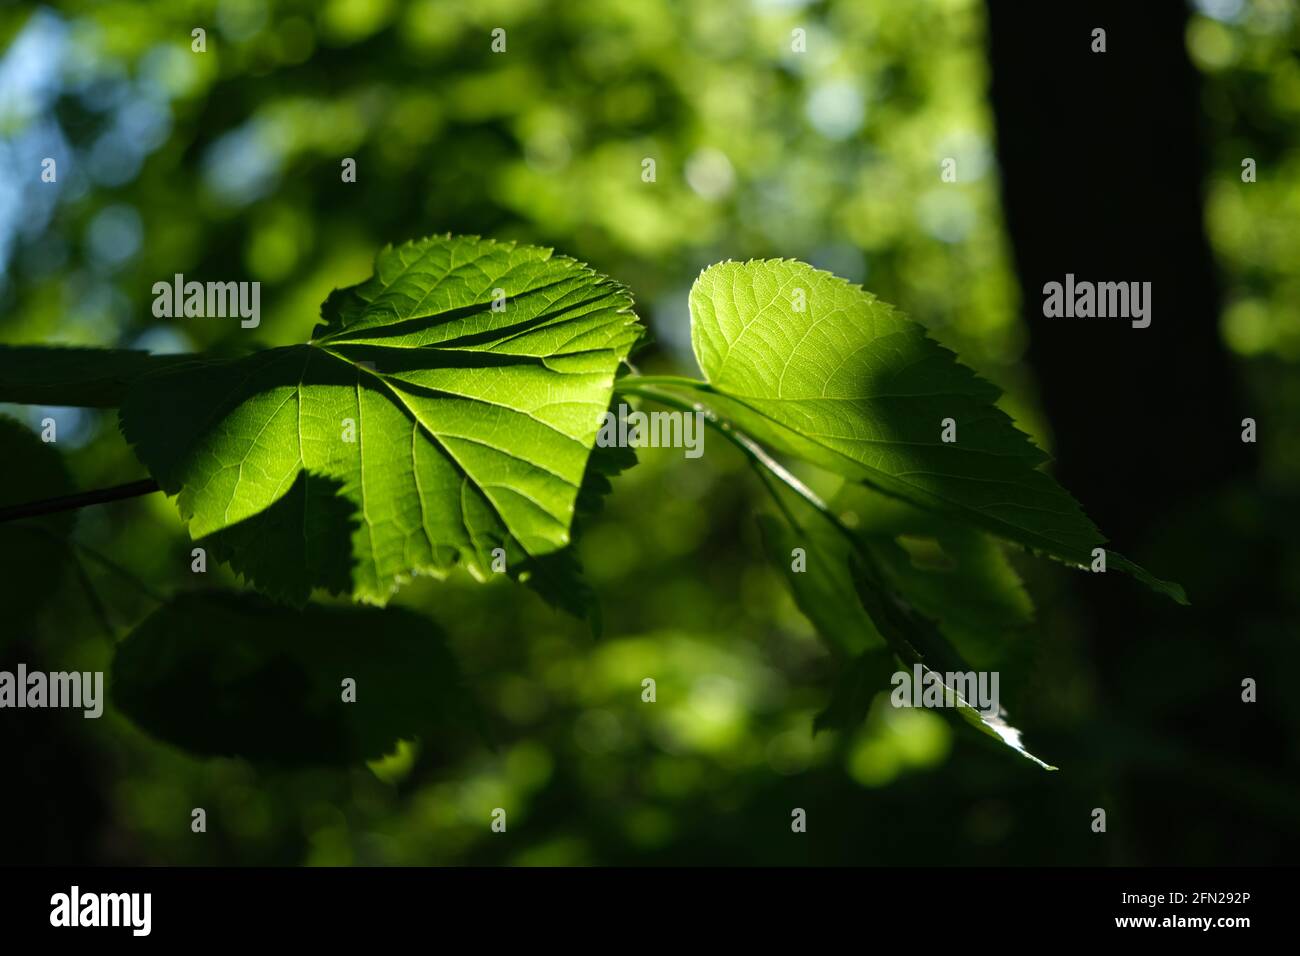 Closeup of a leaf backlit by morning spring light with a soft green background. Stock Photo